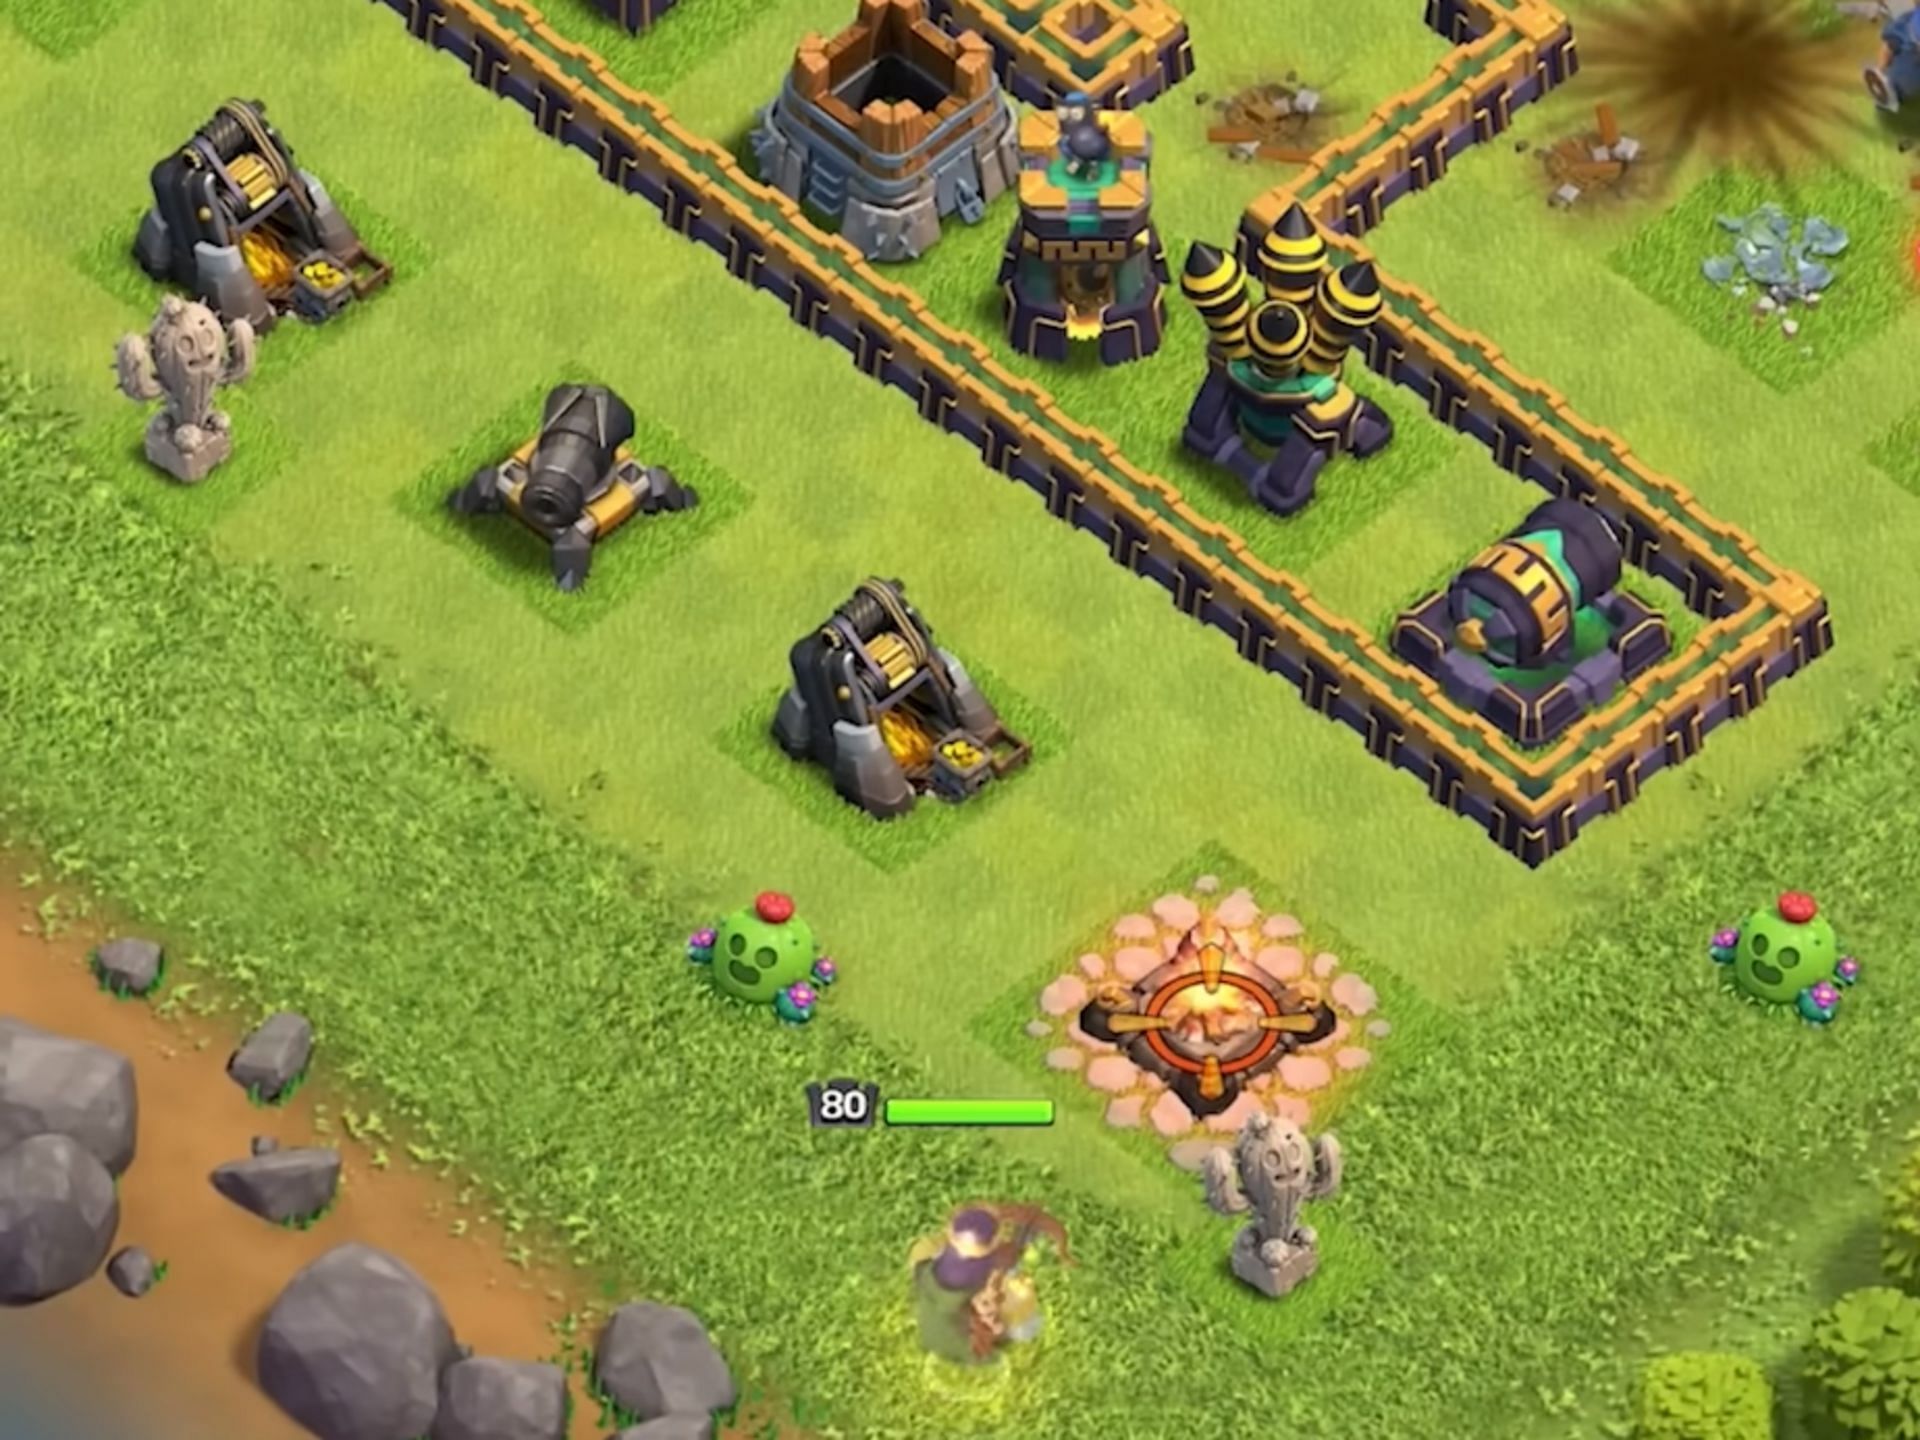 Archer Queen placement (Image via Supercell)